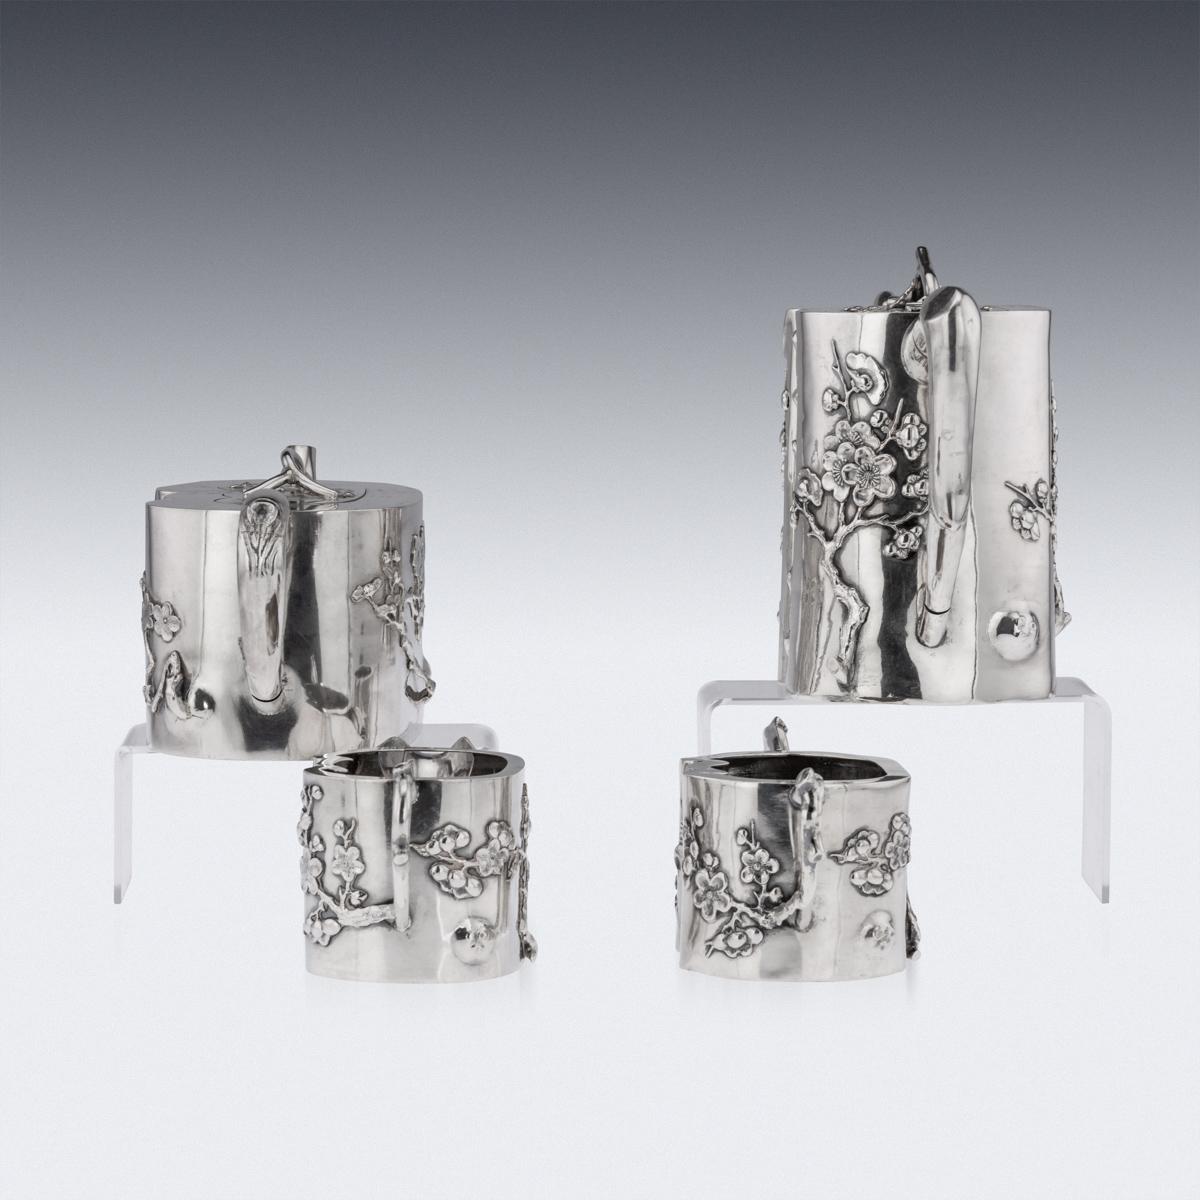 20th Century Chinese export silver four piece tea set, comprising of a coffee pot, teapot, sugar bowl and milk jug, each tree-trunk shaped body applied with prunus flowers and applied with decoration in relief, spout, handles and finials modelled as